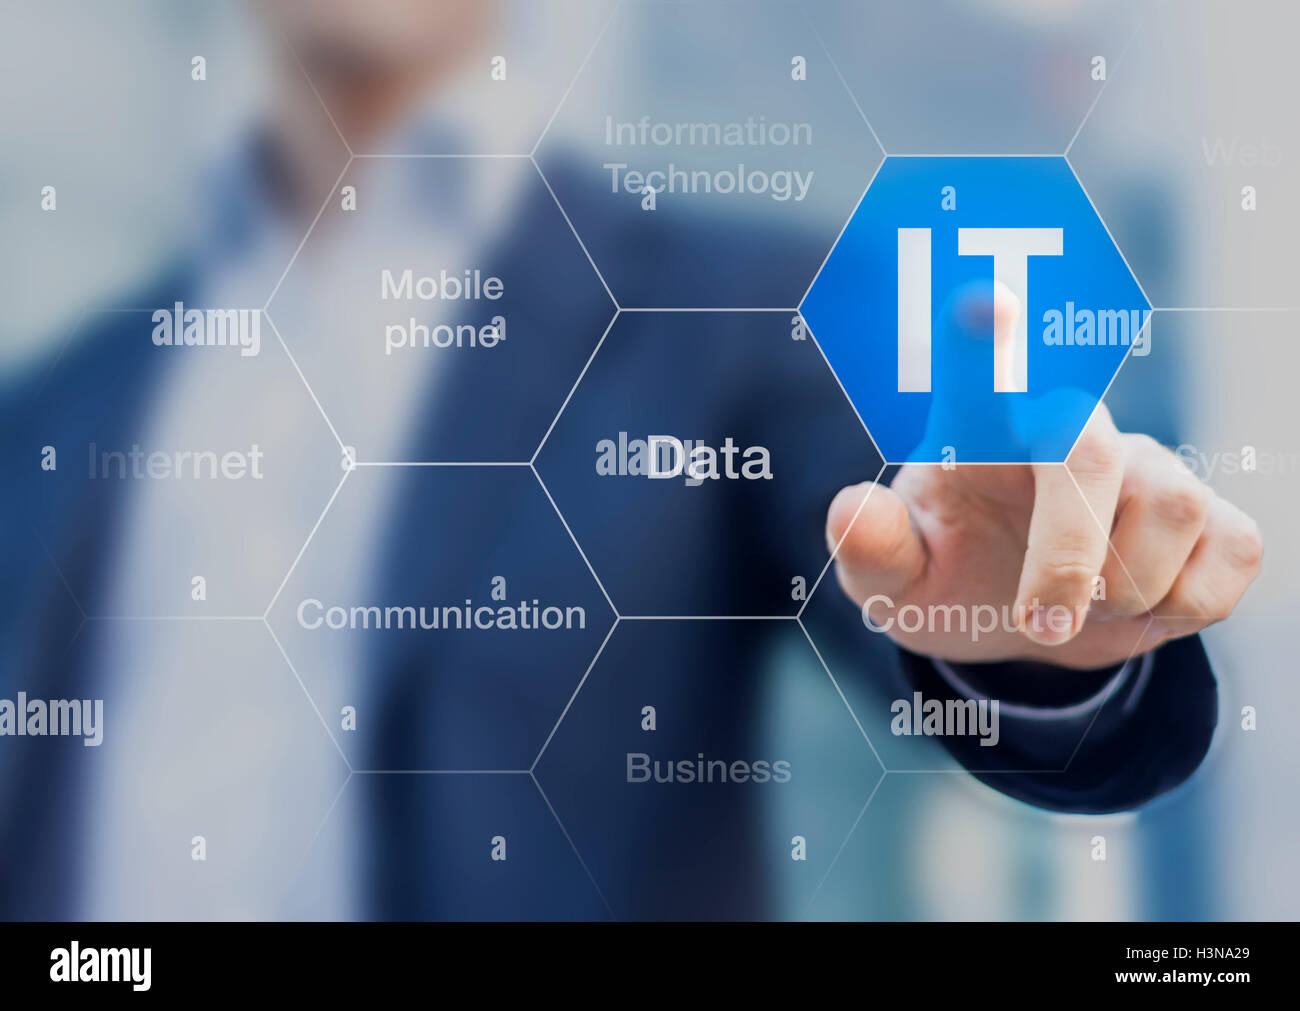 IT consultant presenting tag cloud about information technology Stock Photo